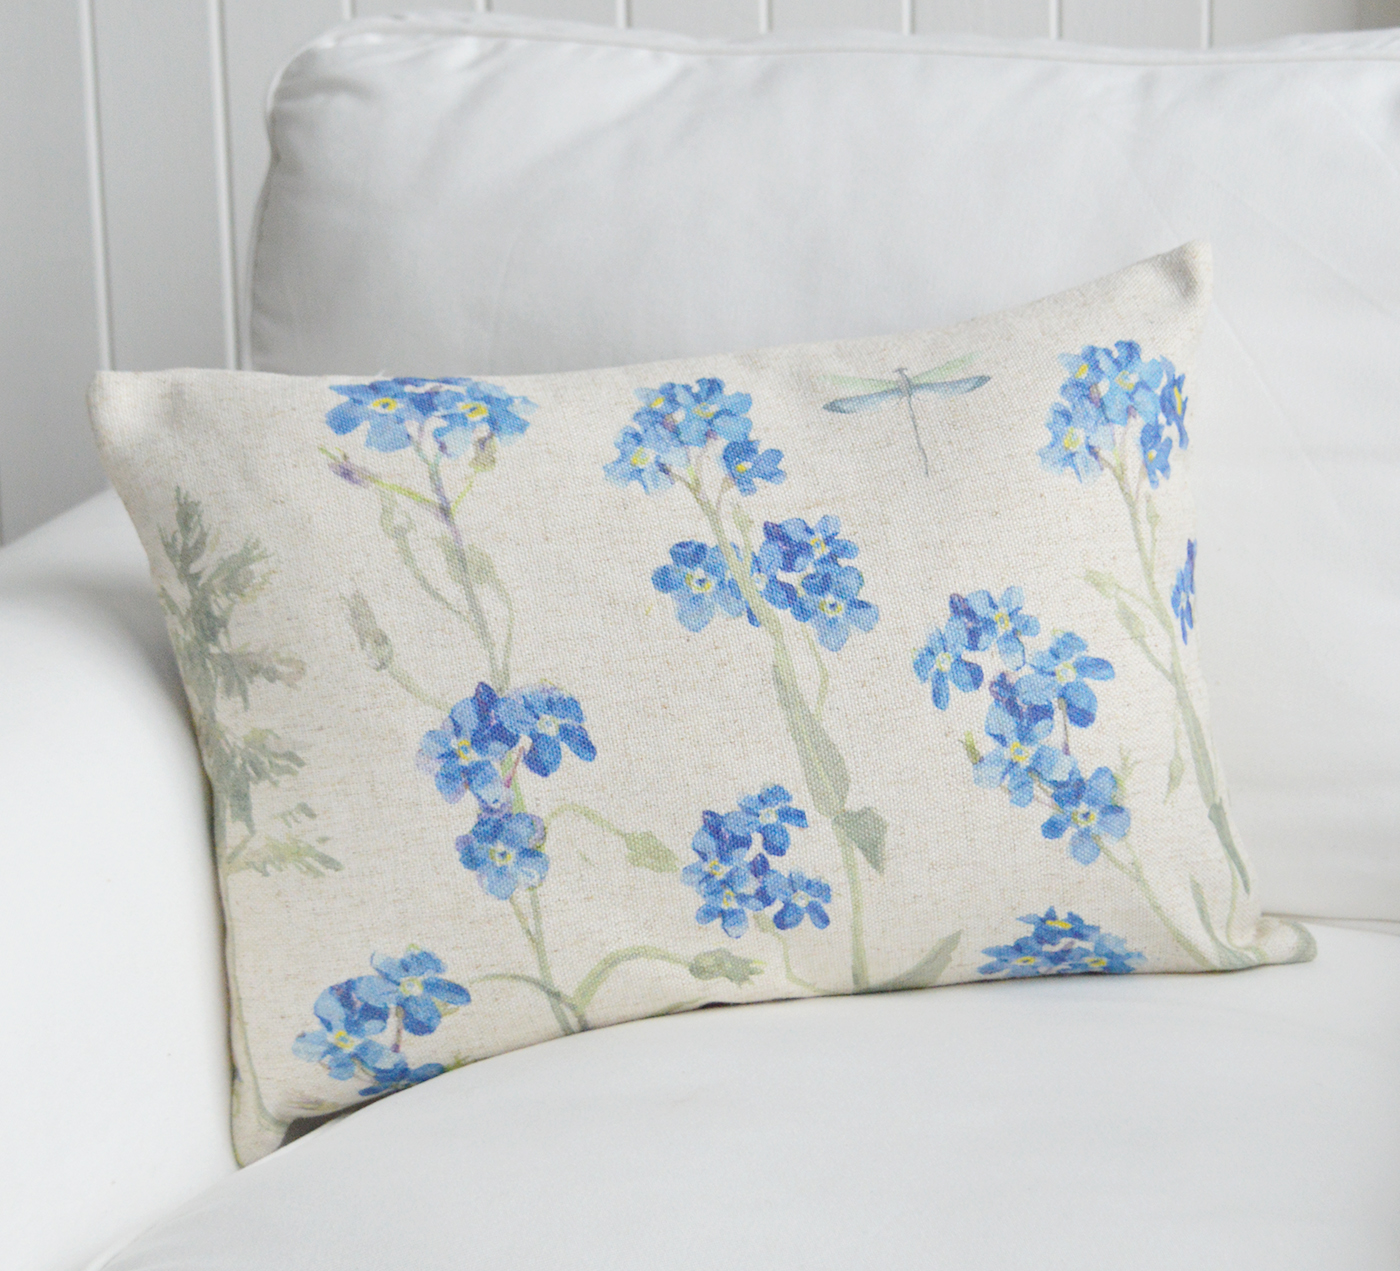 Nantucket floral style cushions for New England  country farmhouse and coastal furniture and interiors